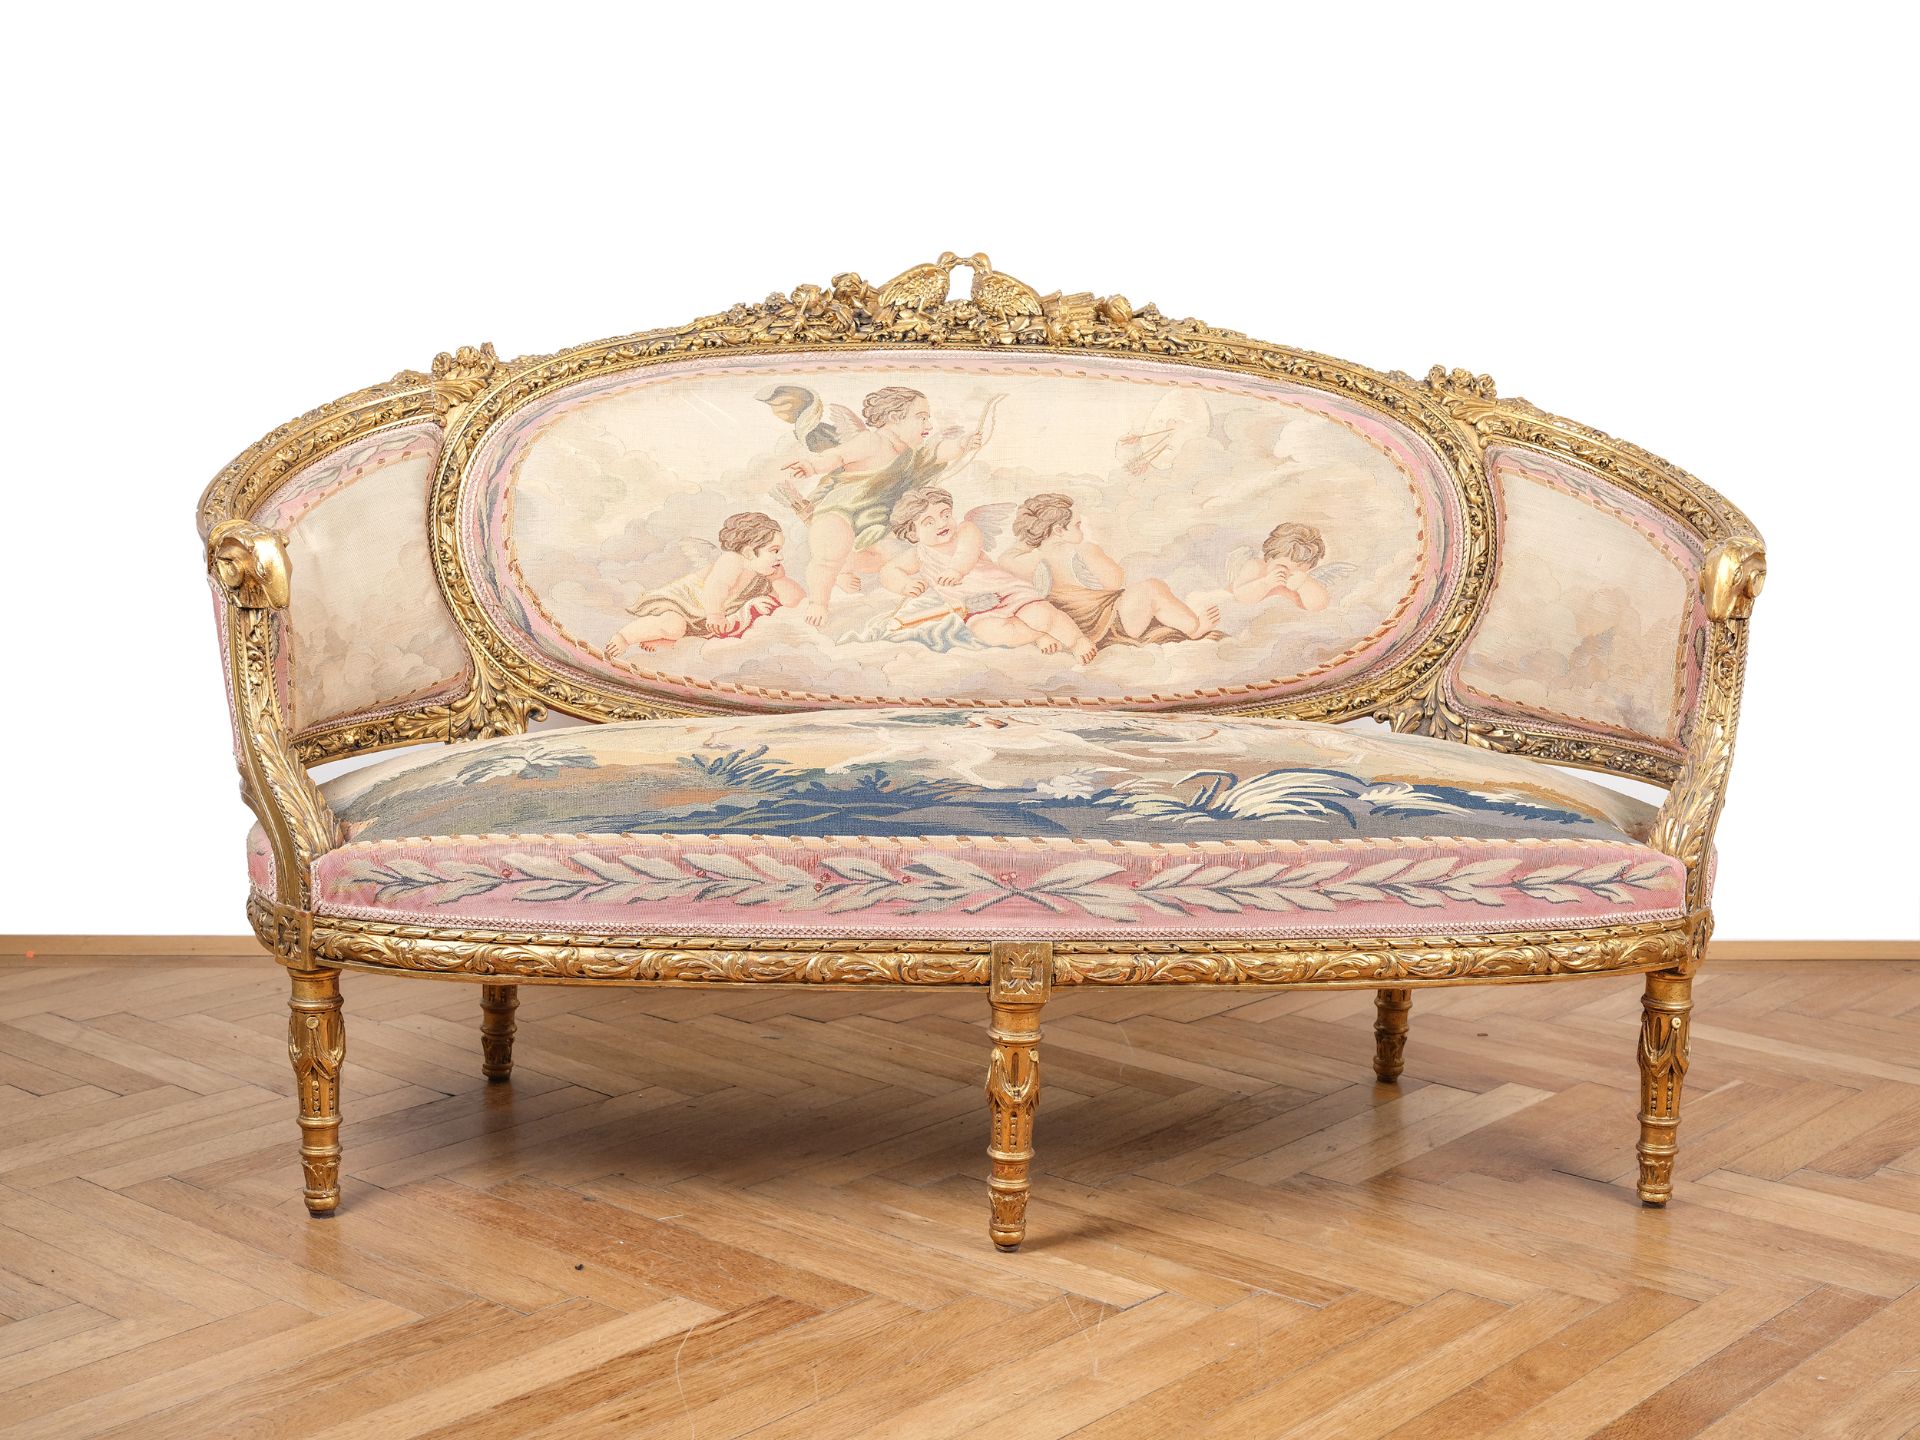 Five-piece seating set: 1 bench & 4 armchairs, Louis XVI style around 1900 - Image 7 of 8